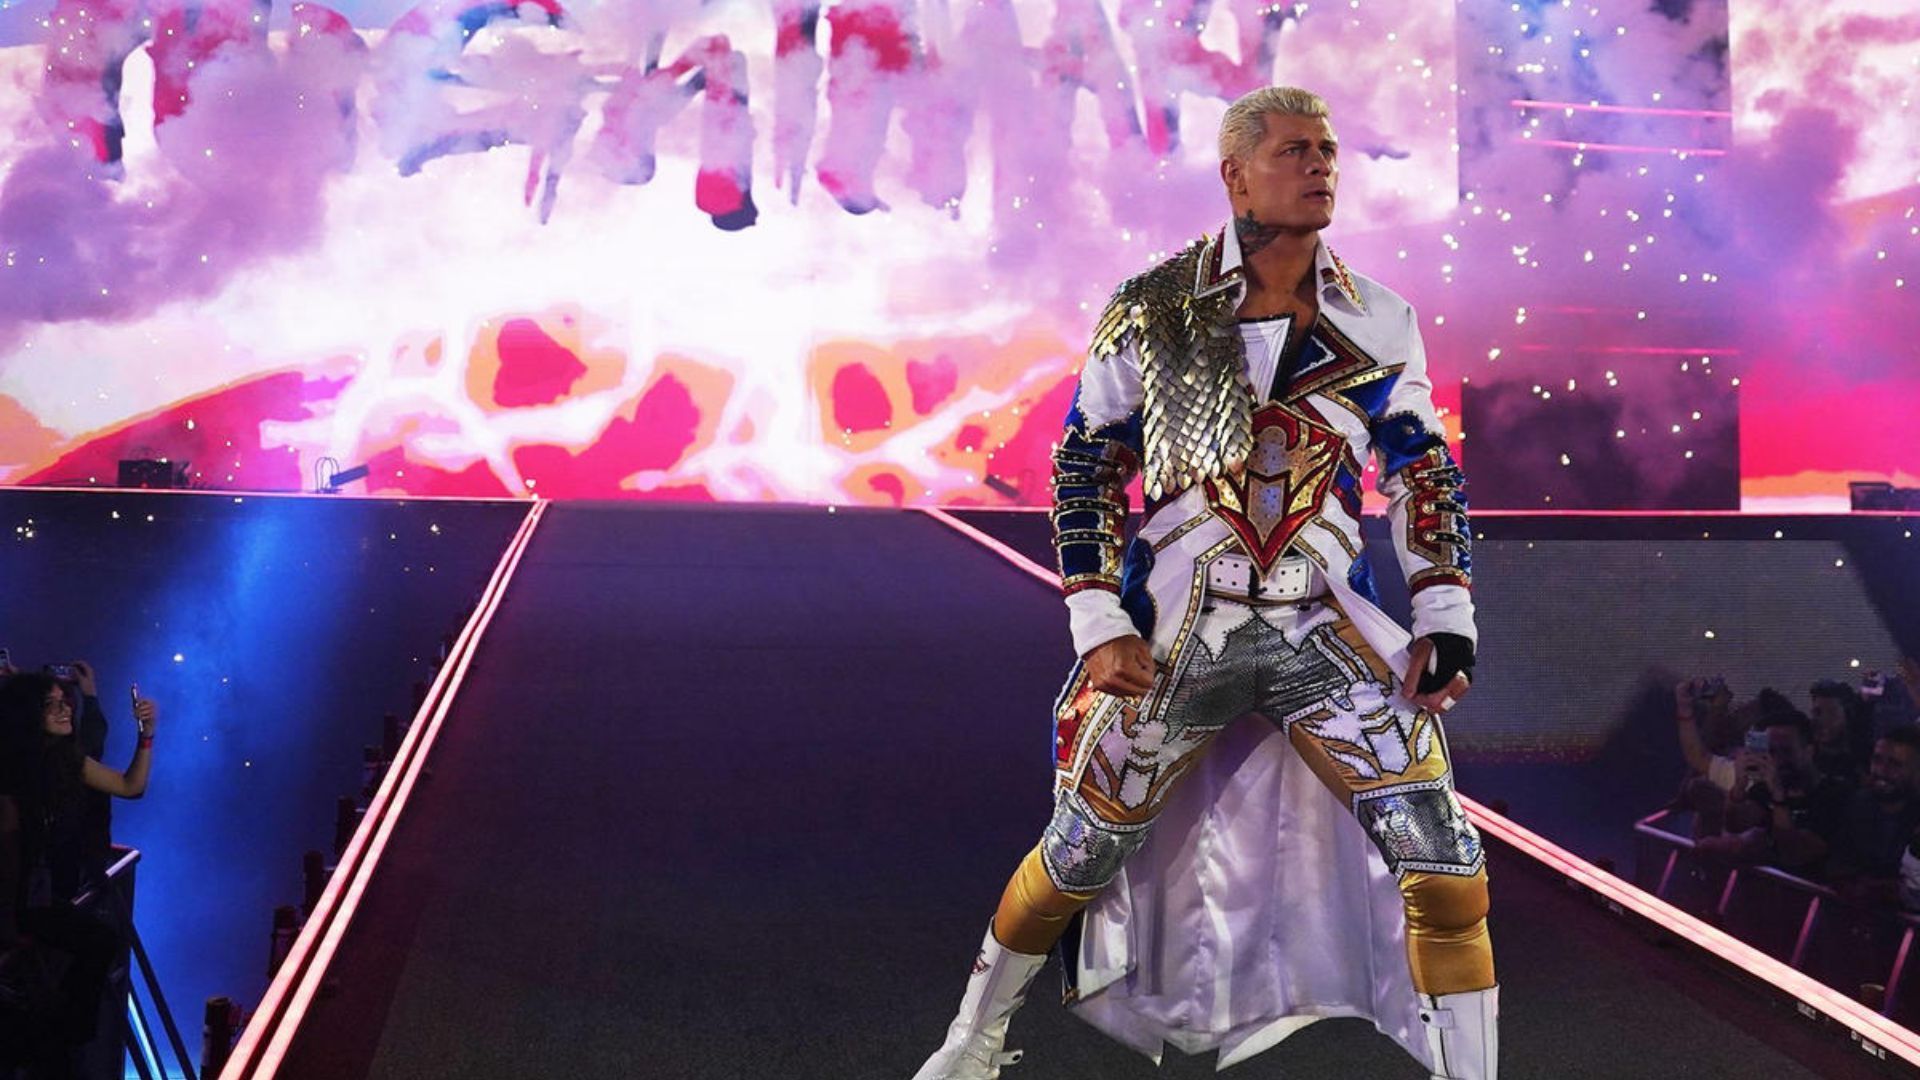 Cody Rhodes during his entrance. Image Credits: wwe.com